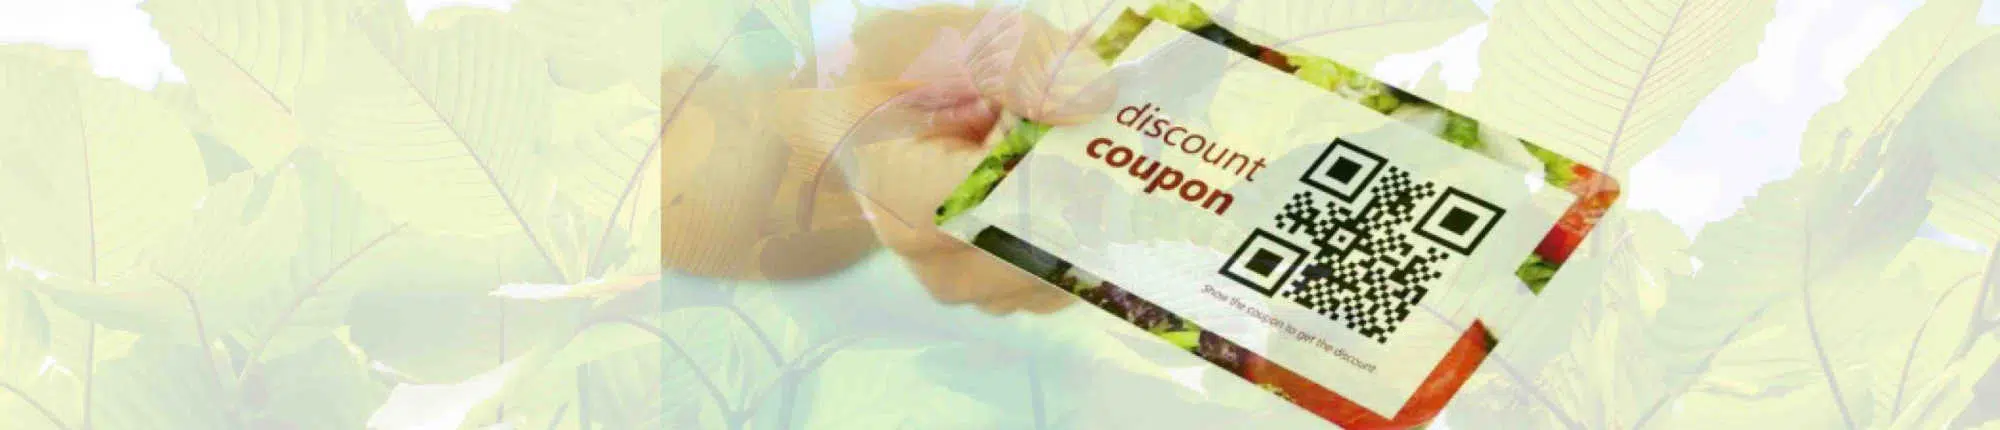 image of coupon code and discounts